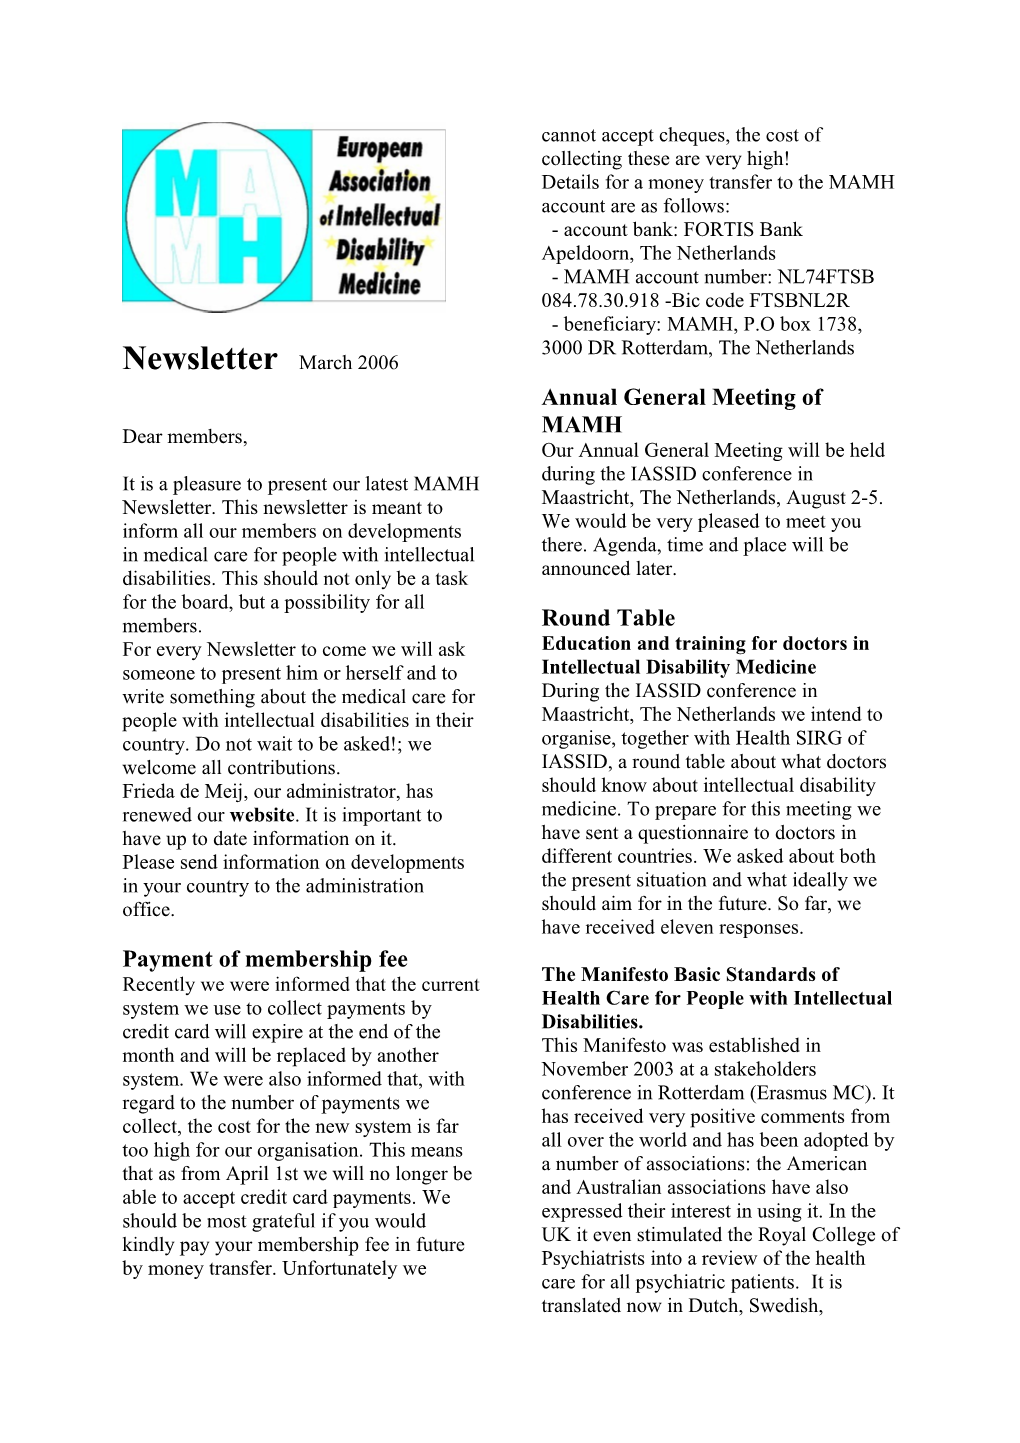 The Manifesto Basic Standards of Helath Care for People with Intellectual Disabilities